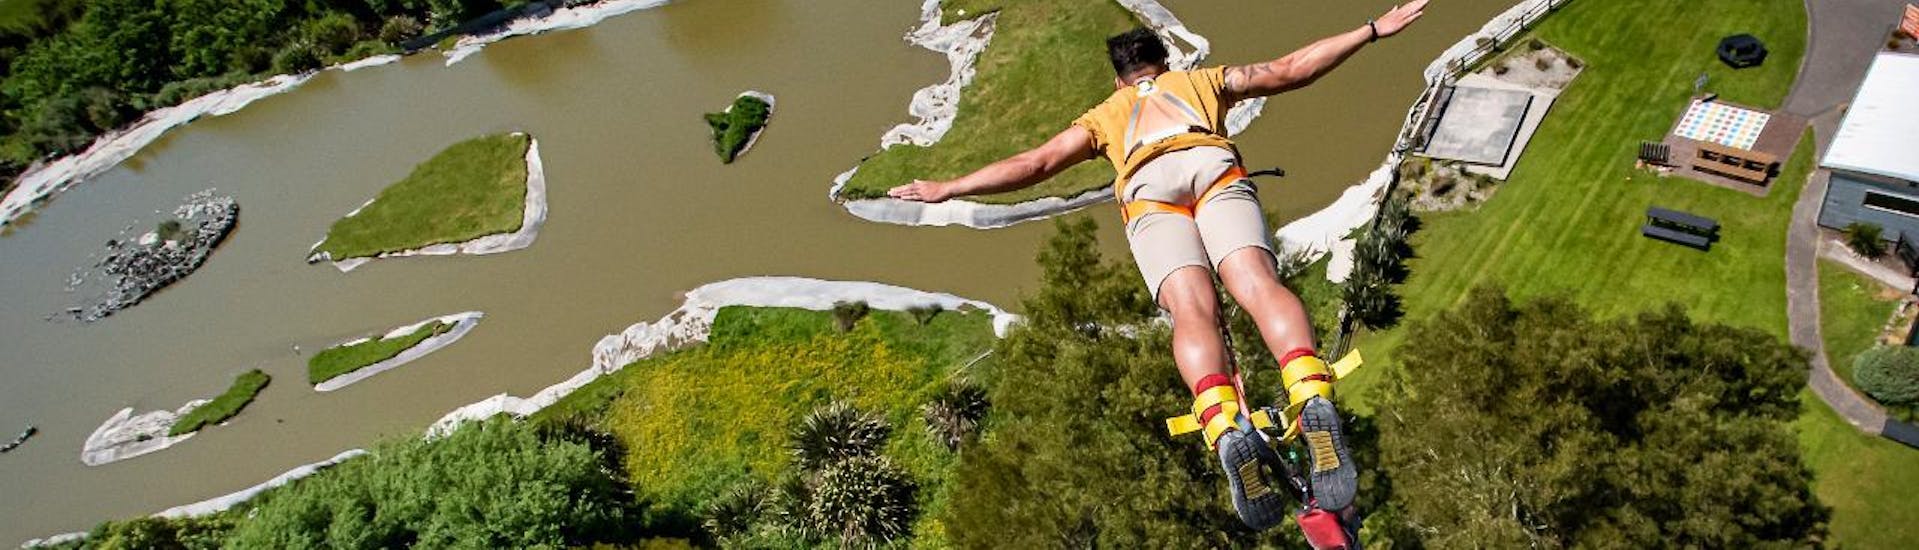 With a VIP Adrenaline Package with Bungy Jump in Rotorua, one happy customer is hurling to the grounds during an adrenaline-packed jumping of a 43m high tower in Velocity Valley Rotorua Adventure Park.